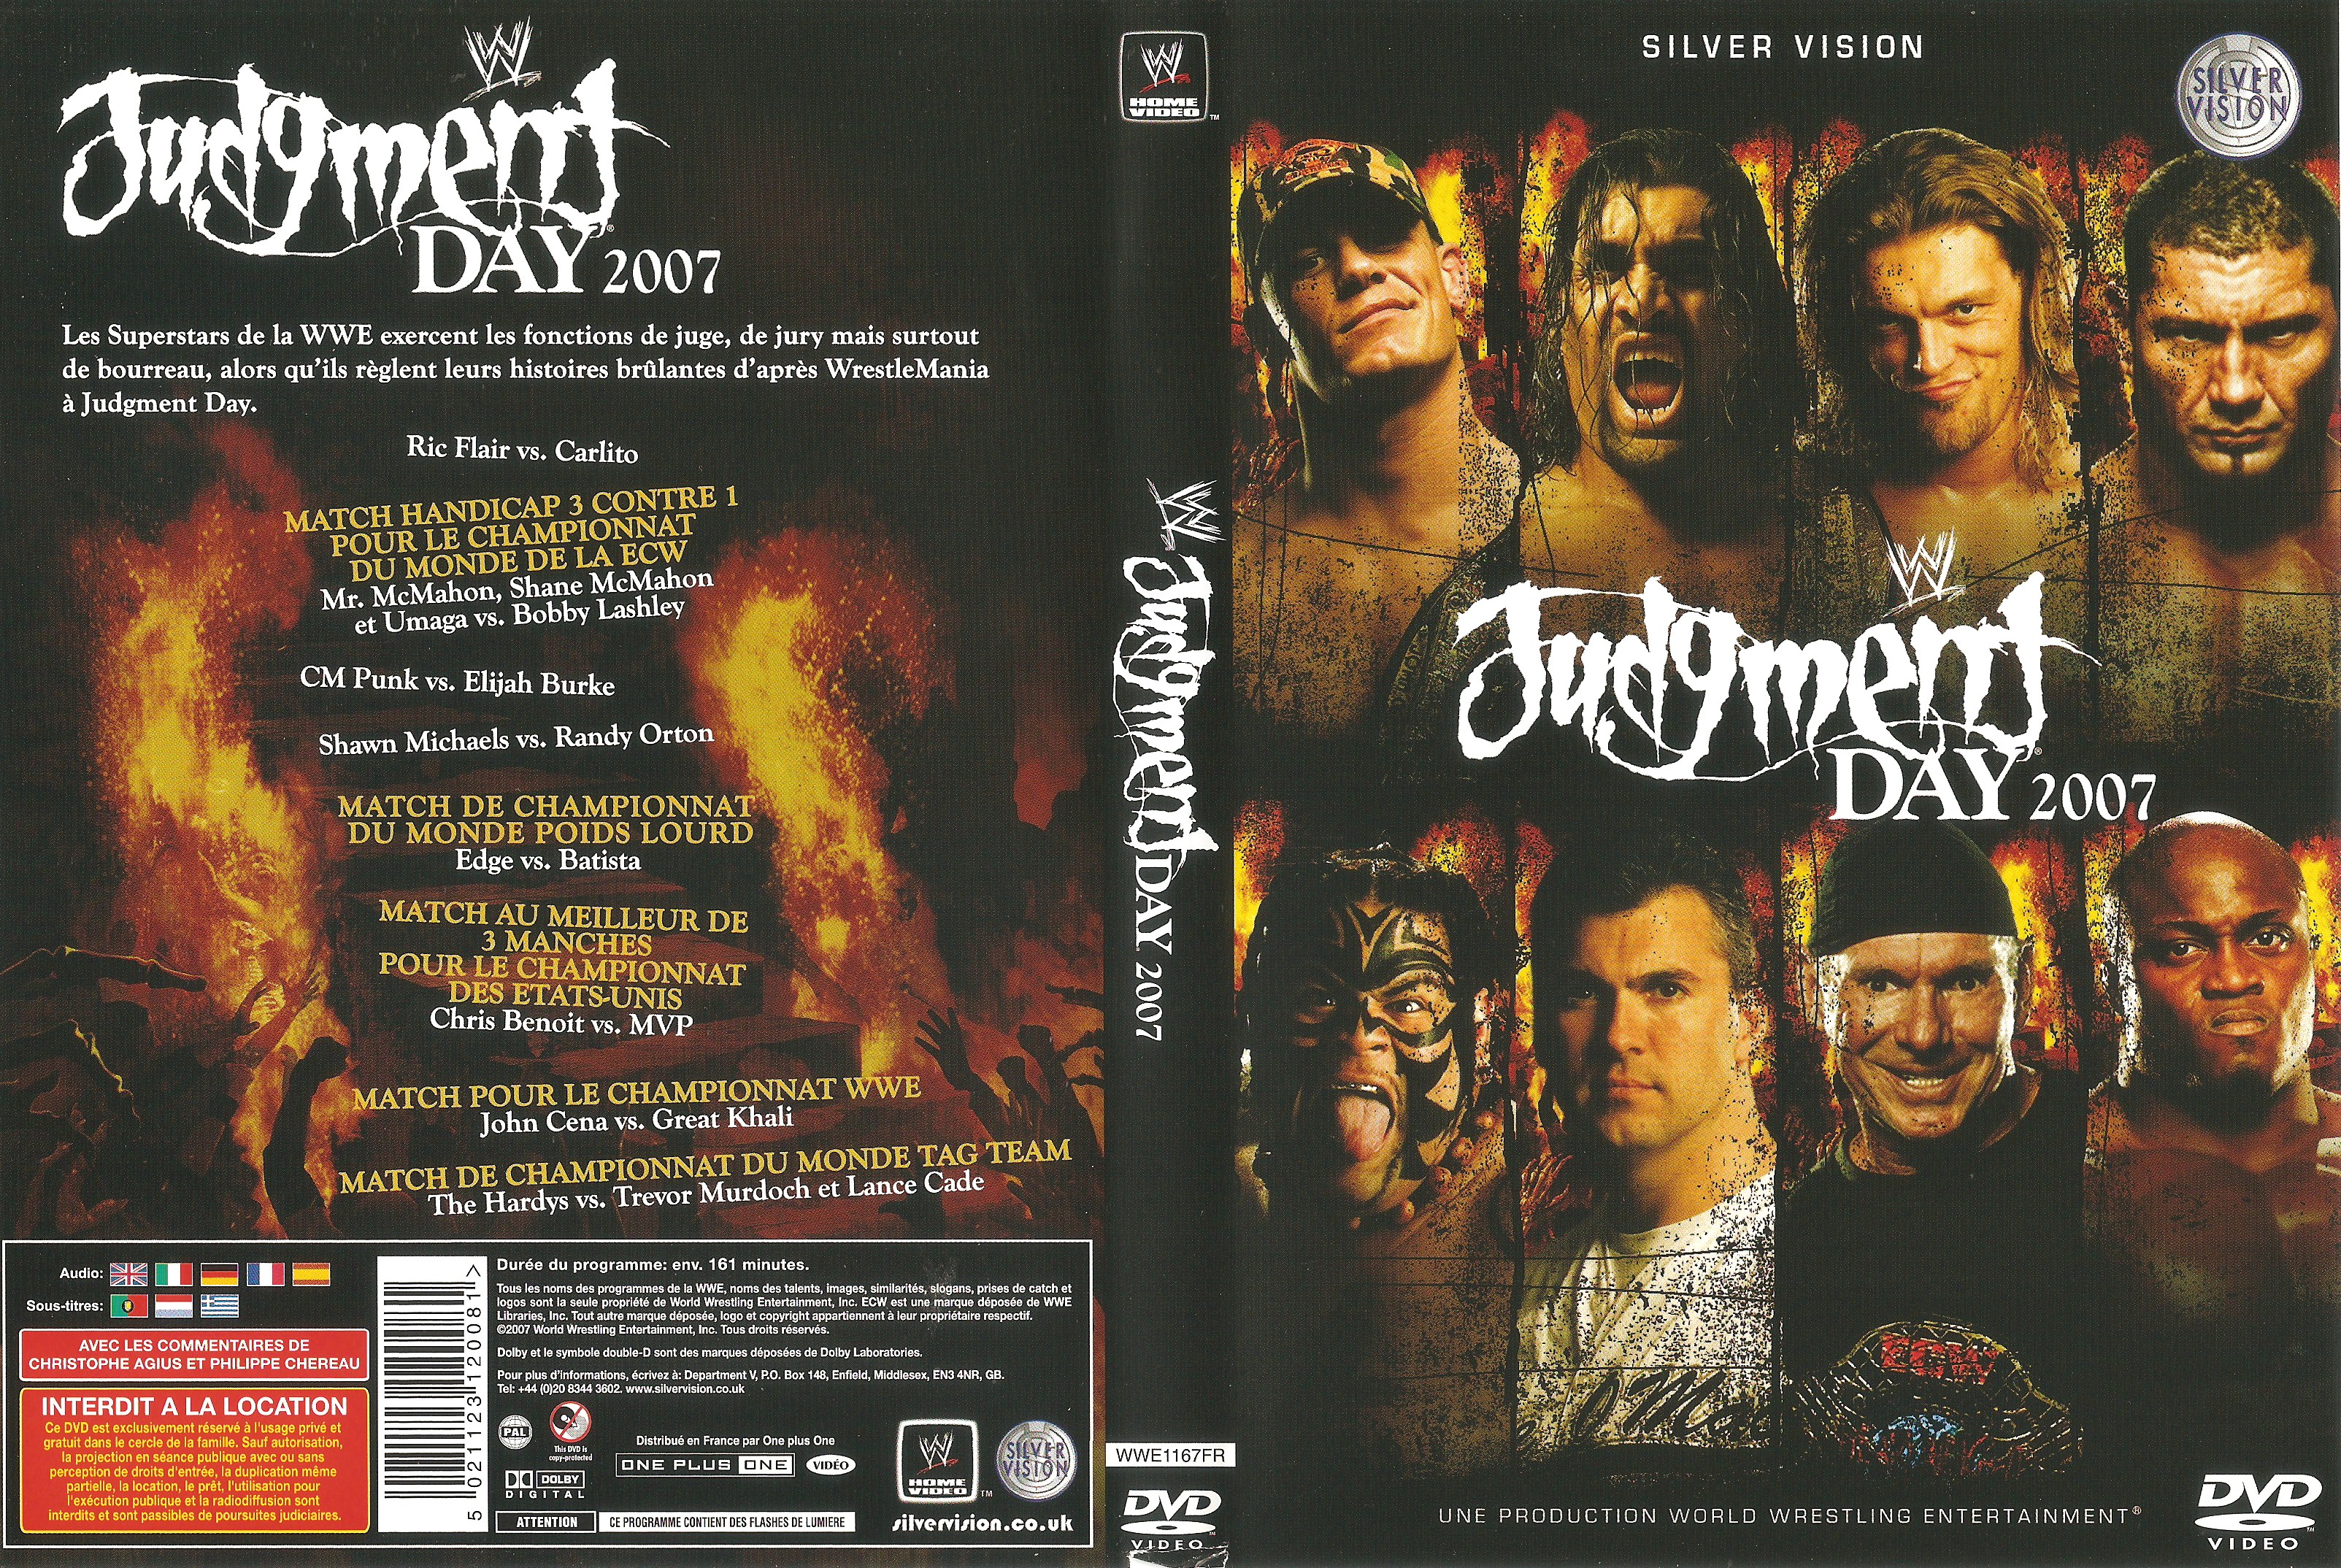 Jaquette DVD WWE Judgment Day 2007